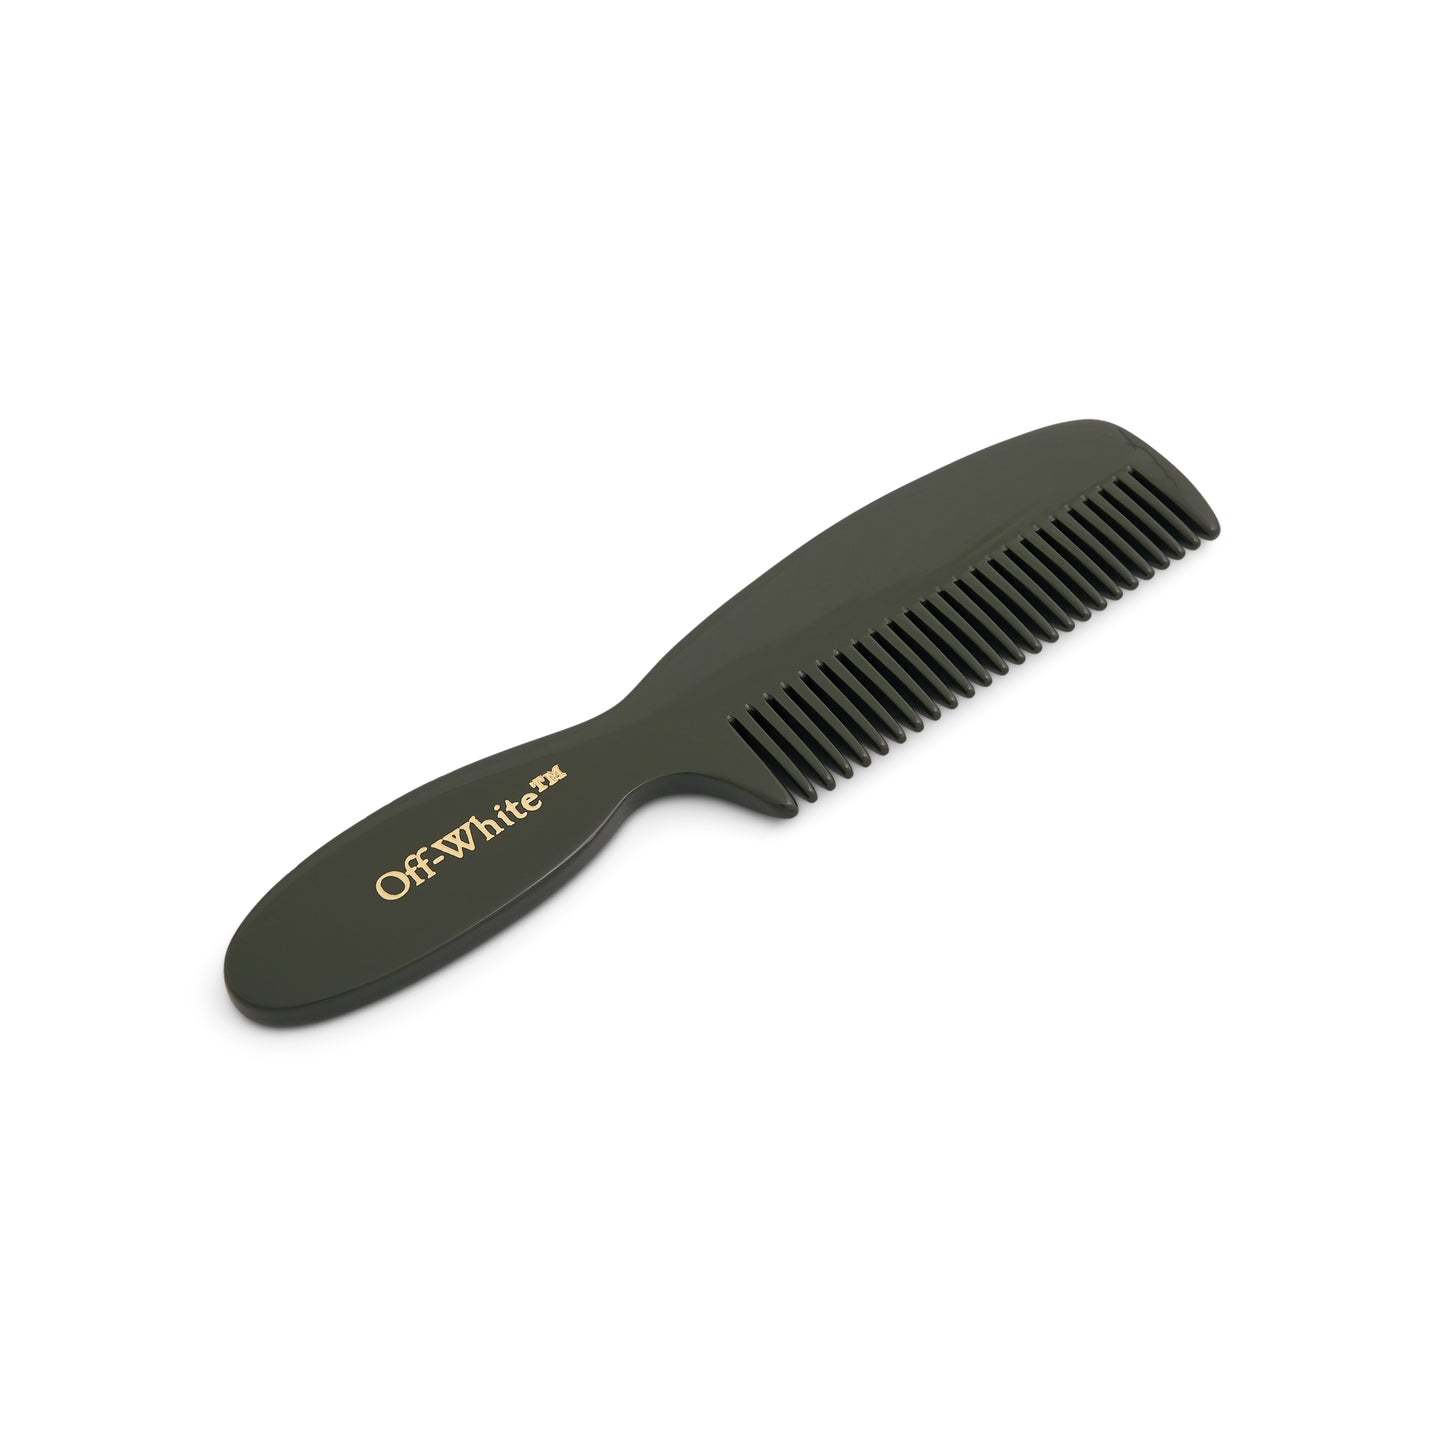 Bookish Hair Comb in Army Green